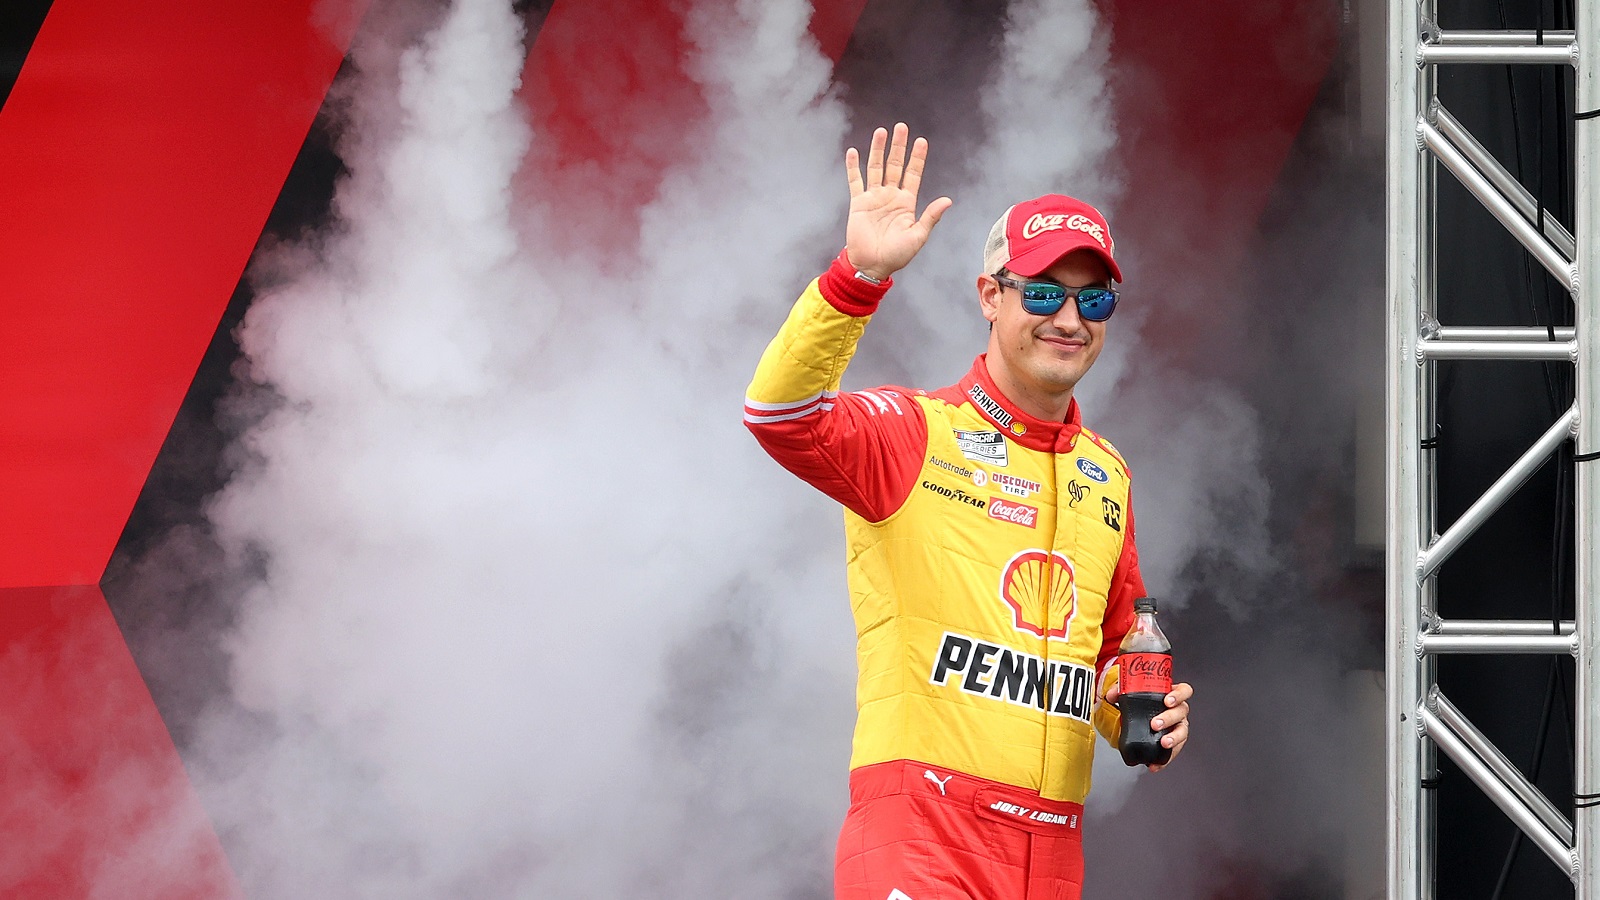 Joey Logano waves to fans as he walks onstage during driver intros prior to the NASCAR Cup Series Coke Zero Sugar 400 at Daytona International Speedway on Aug. 28, 2022. | James Gilbert/Getty Images